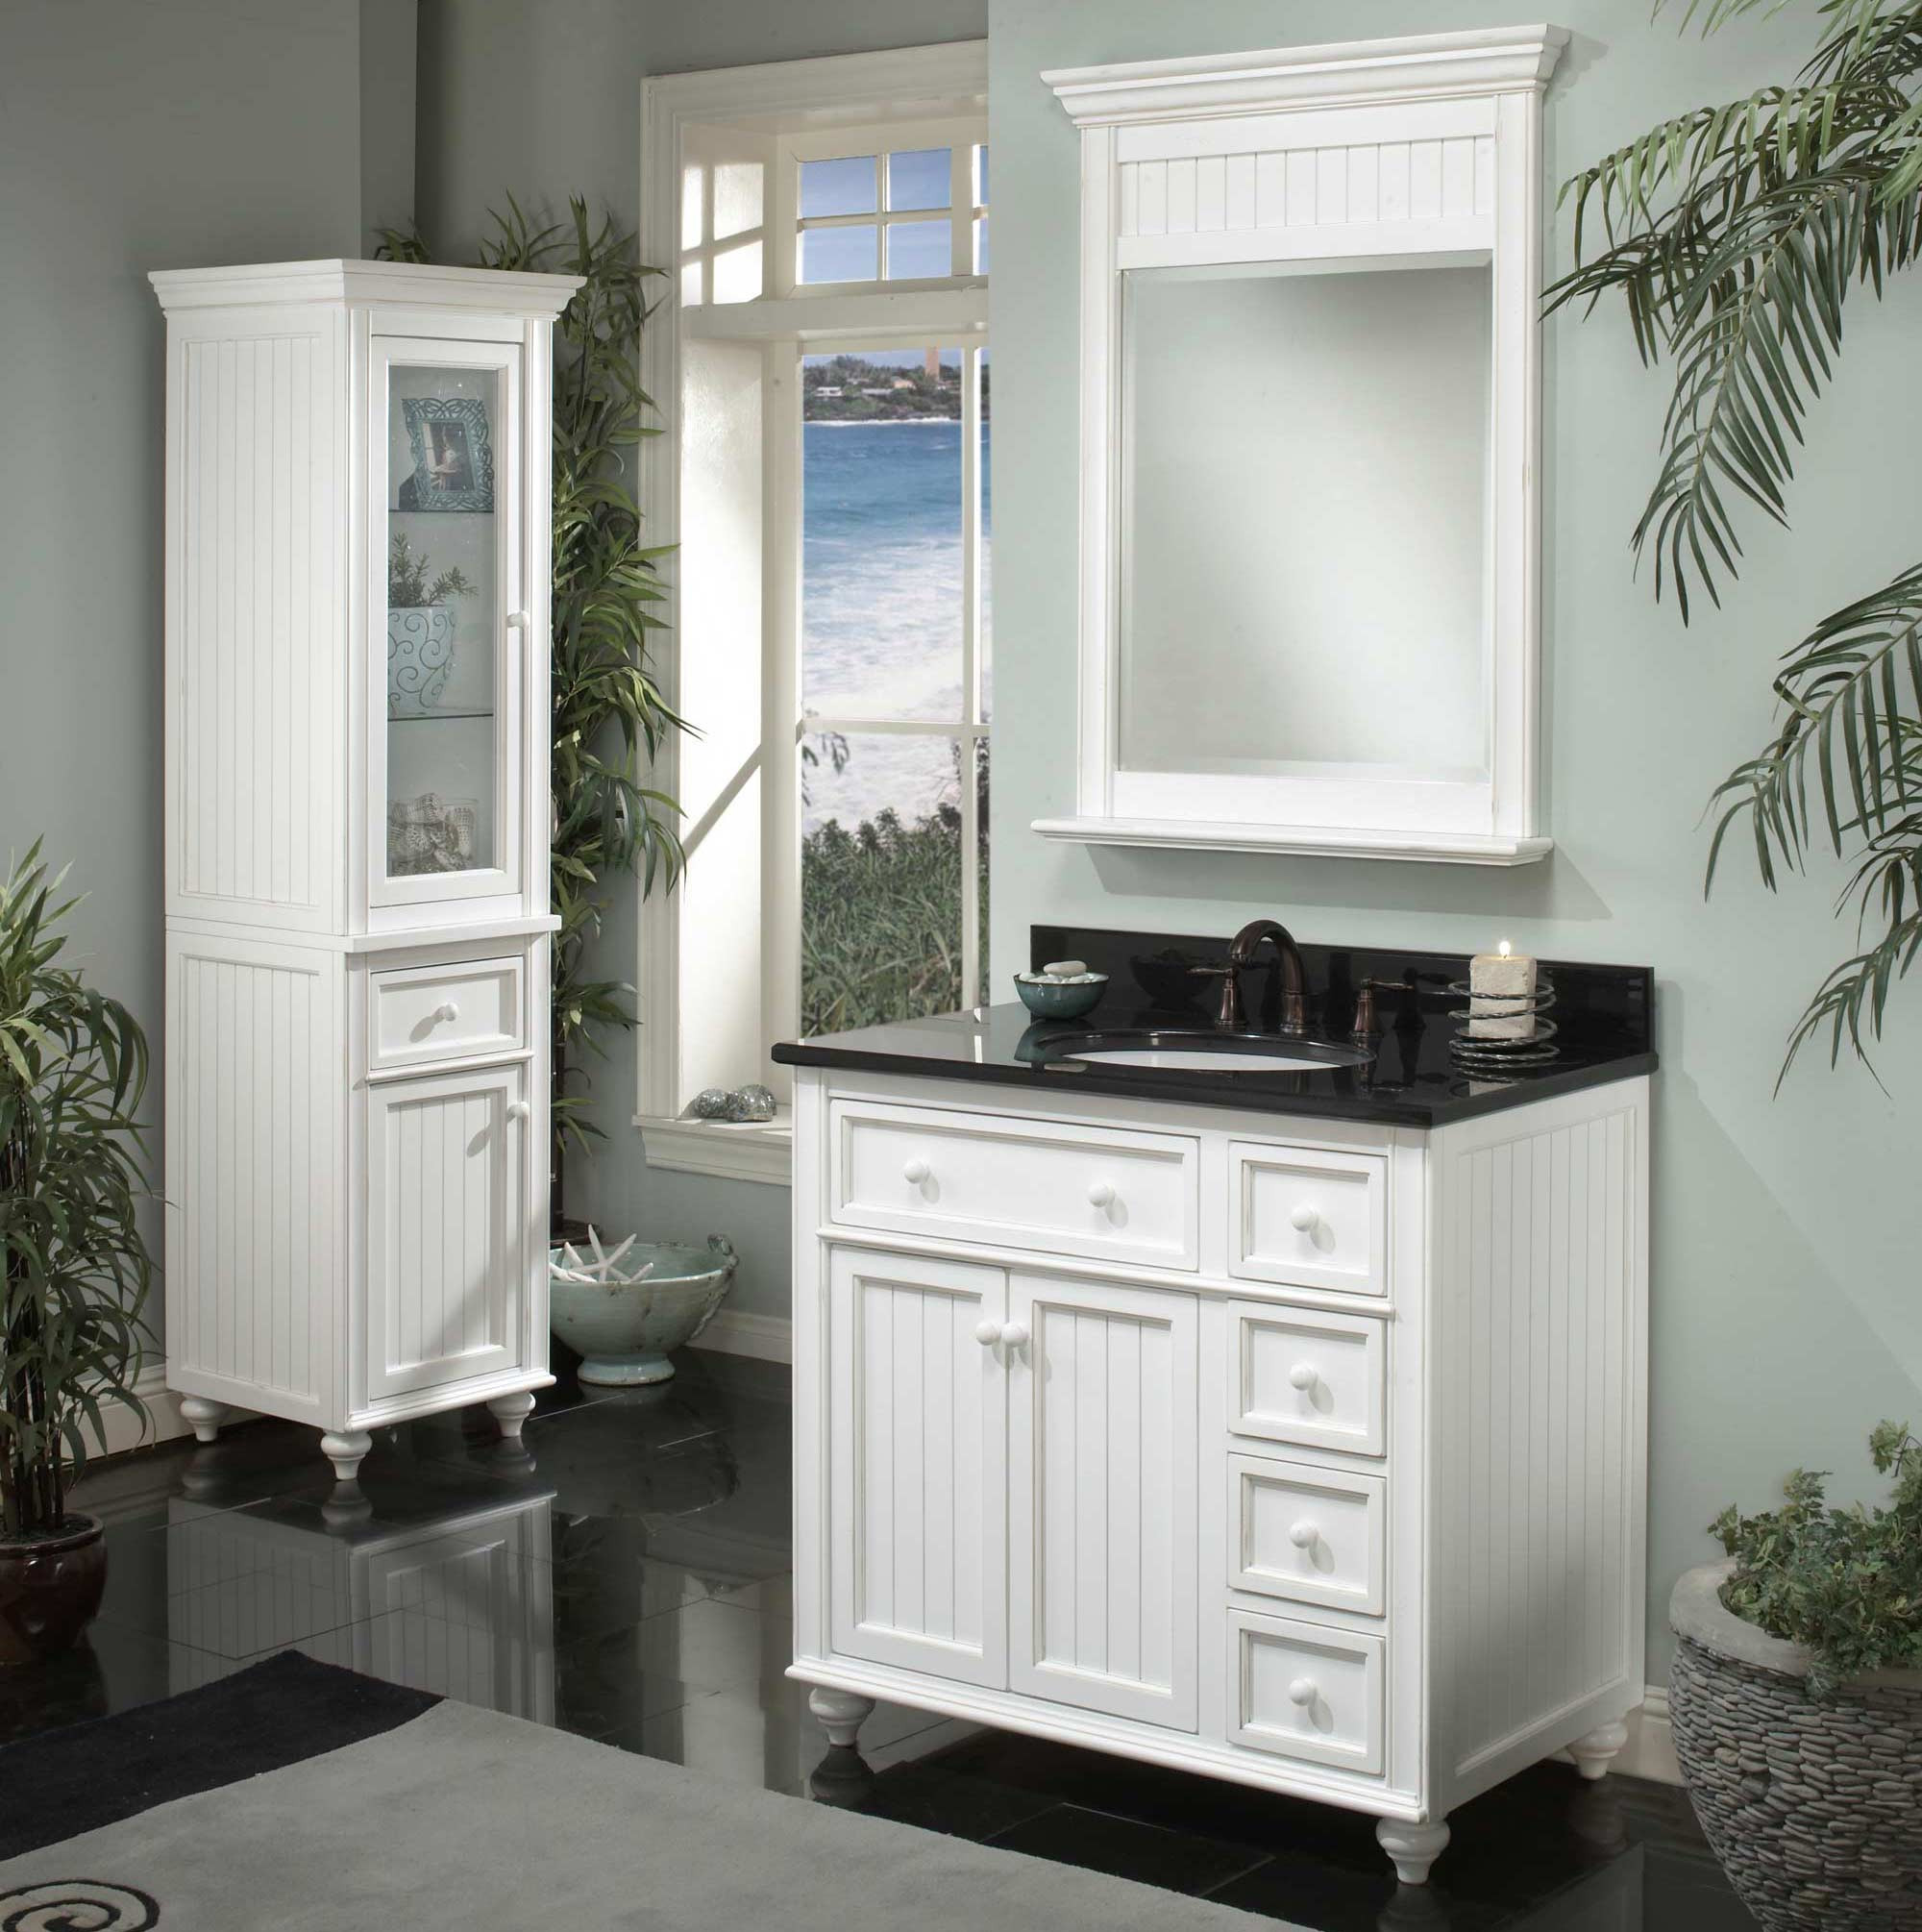 Small White Bathroom Vanity
 A Selection of White Bathroom Vanities by Sagehill Designs